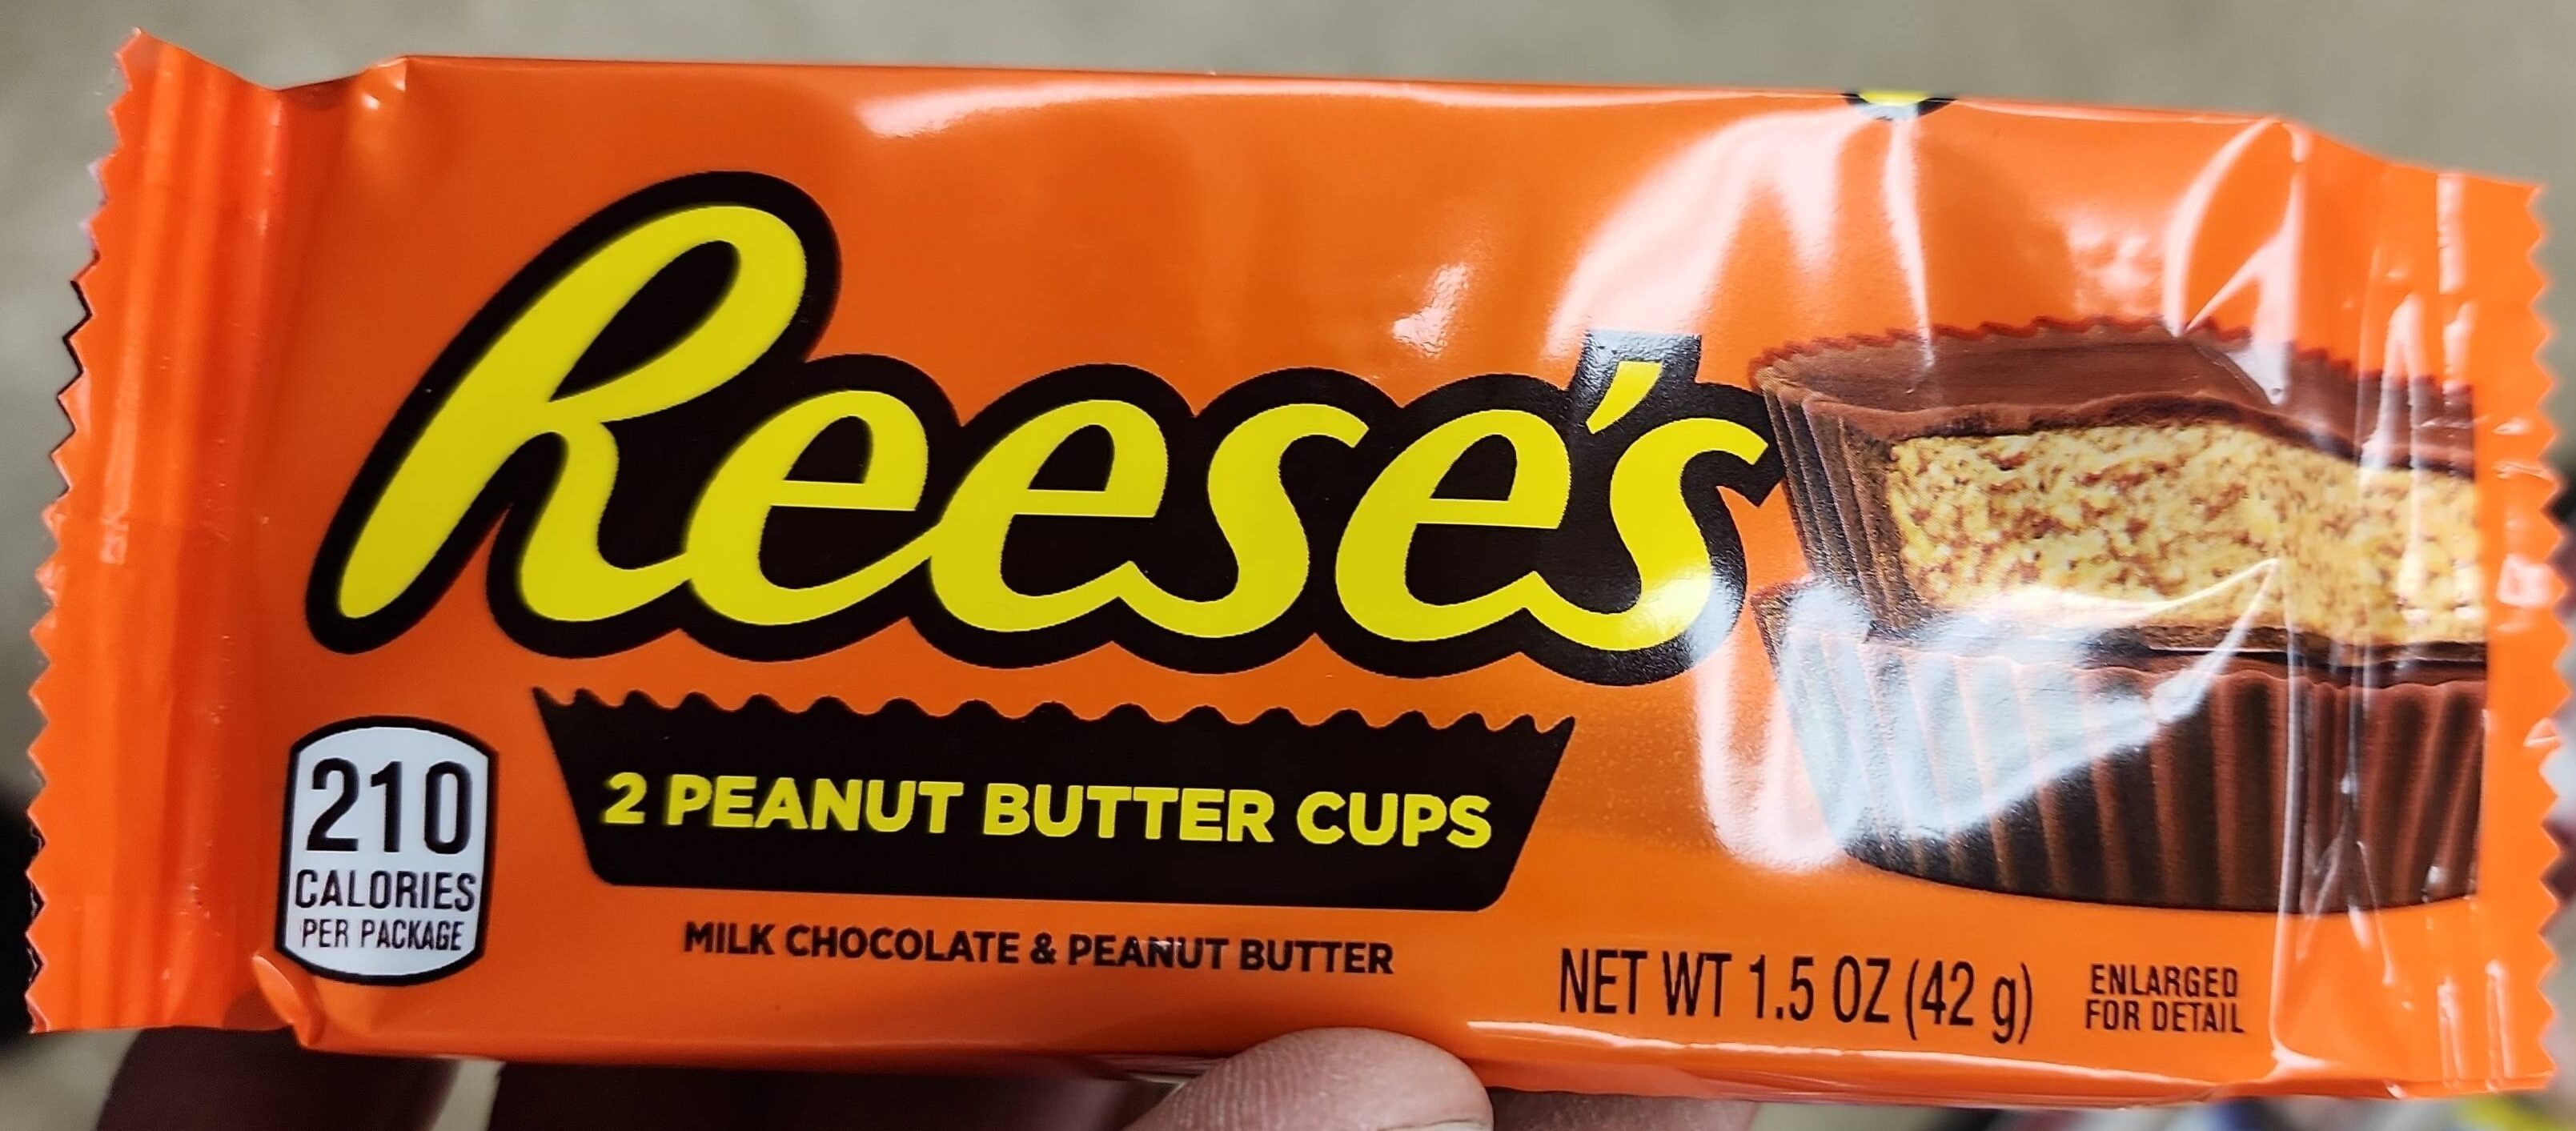 Peanut Butter Cups - Product